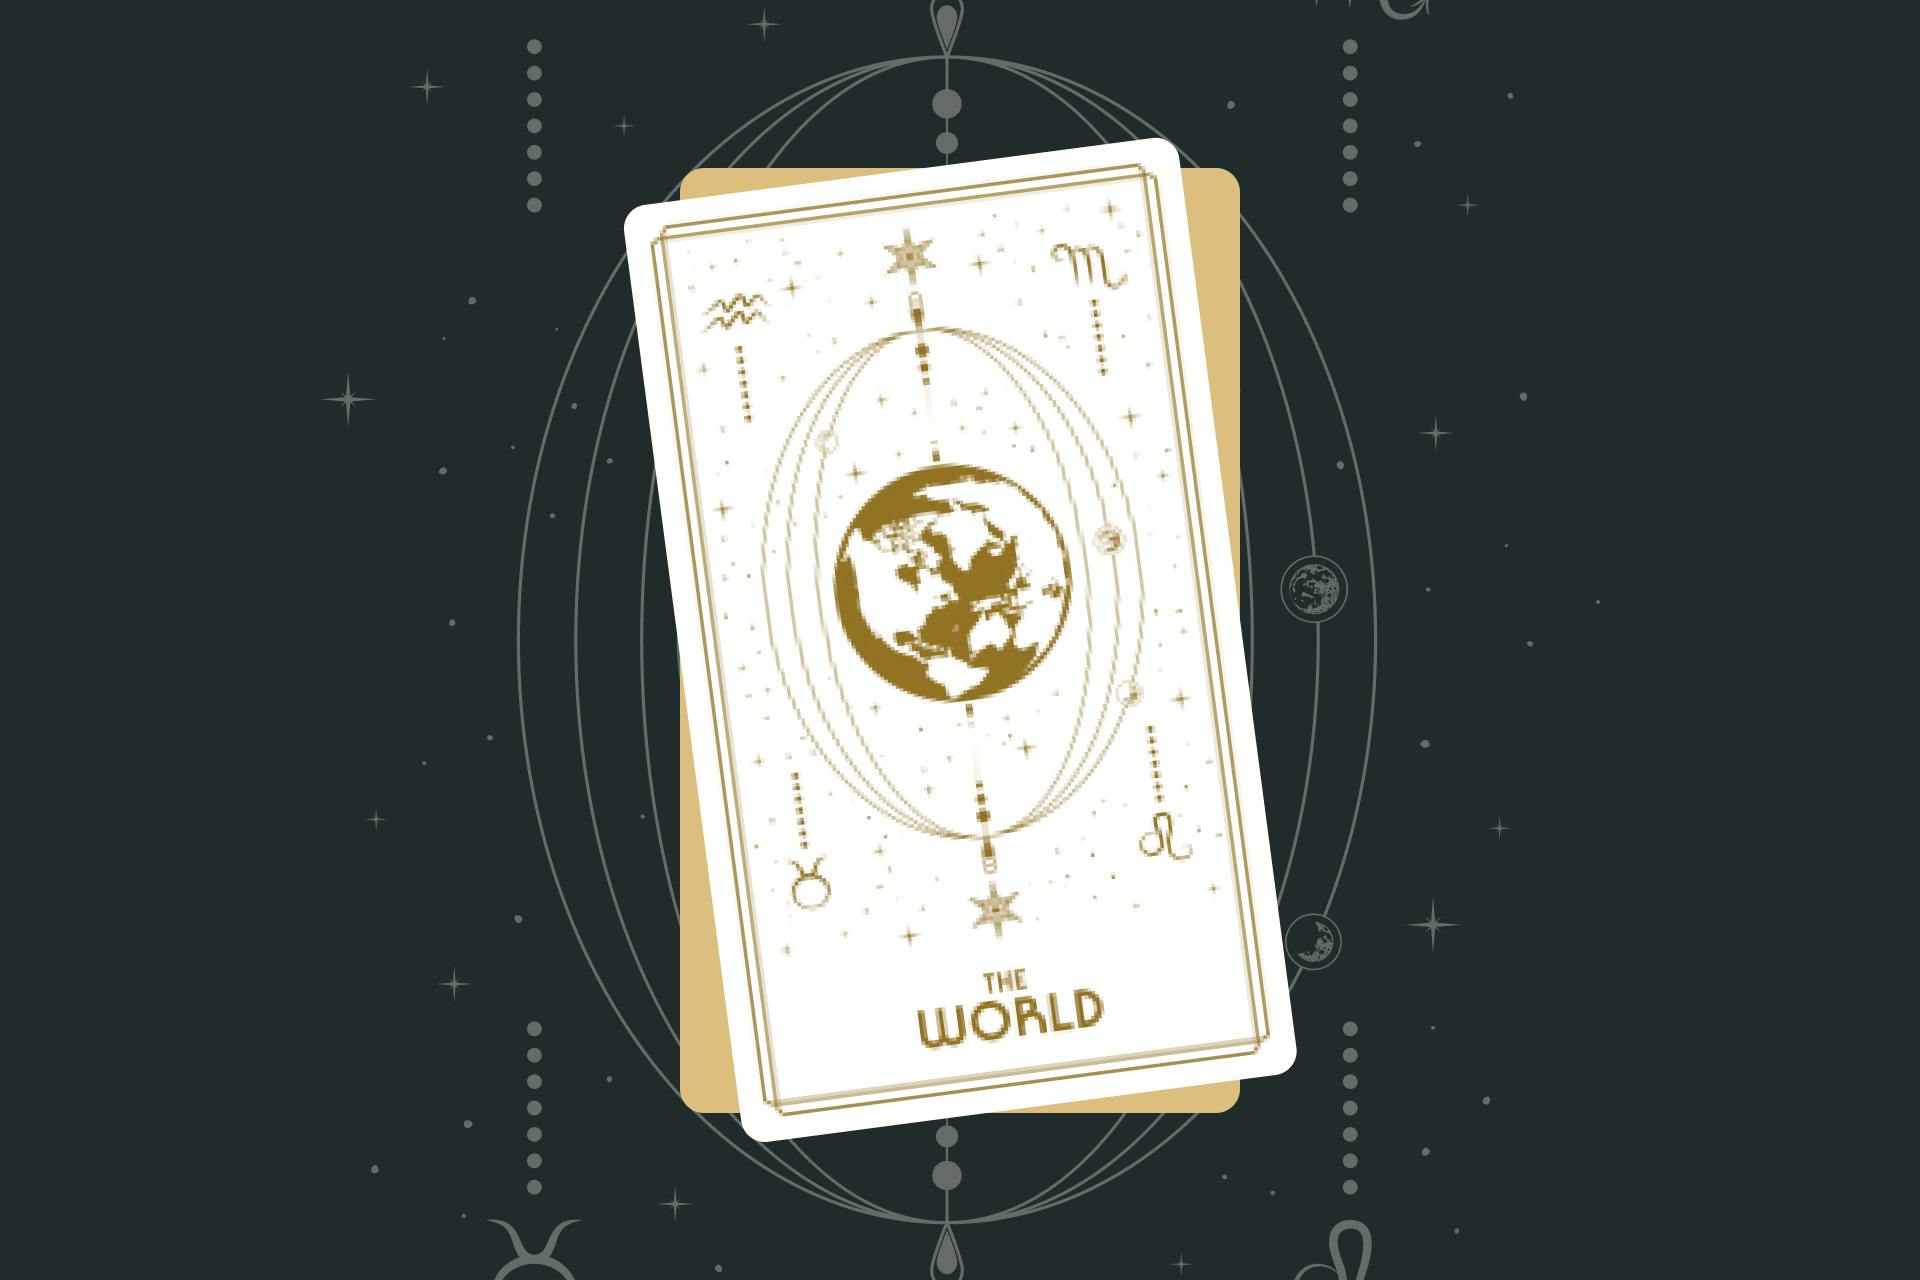 The World Tarot Card Upright and Reversed Keywords